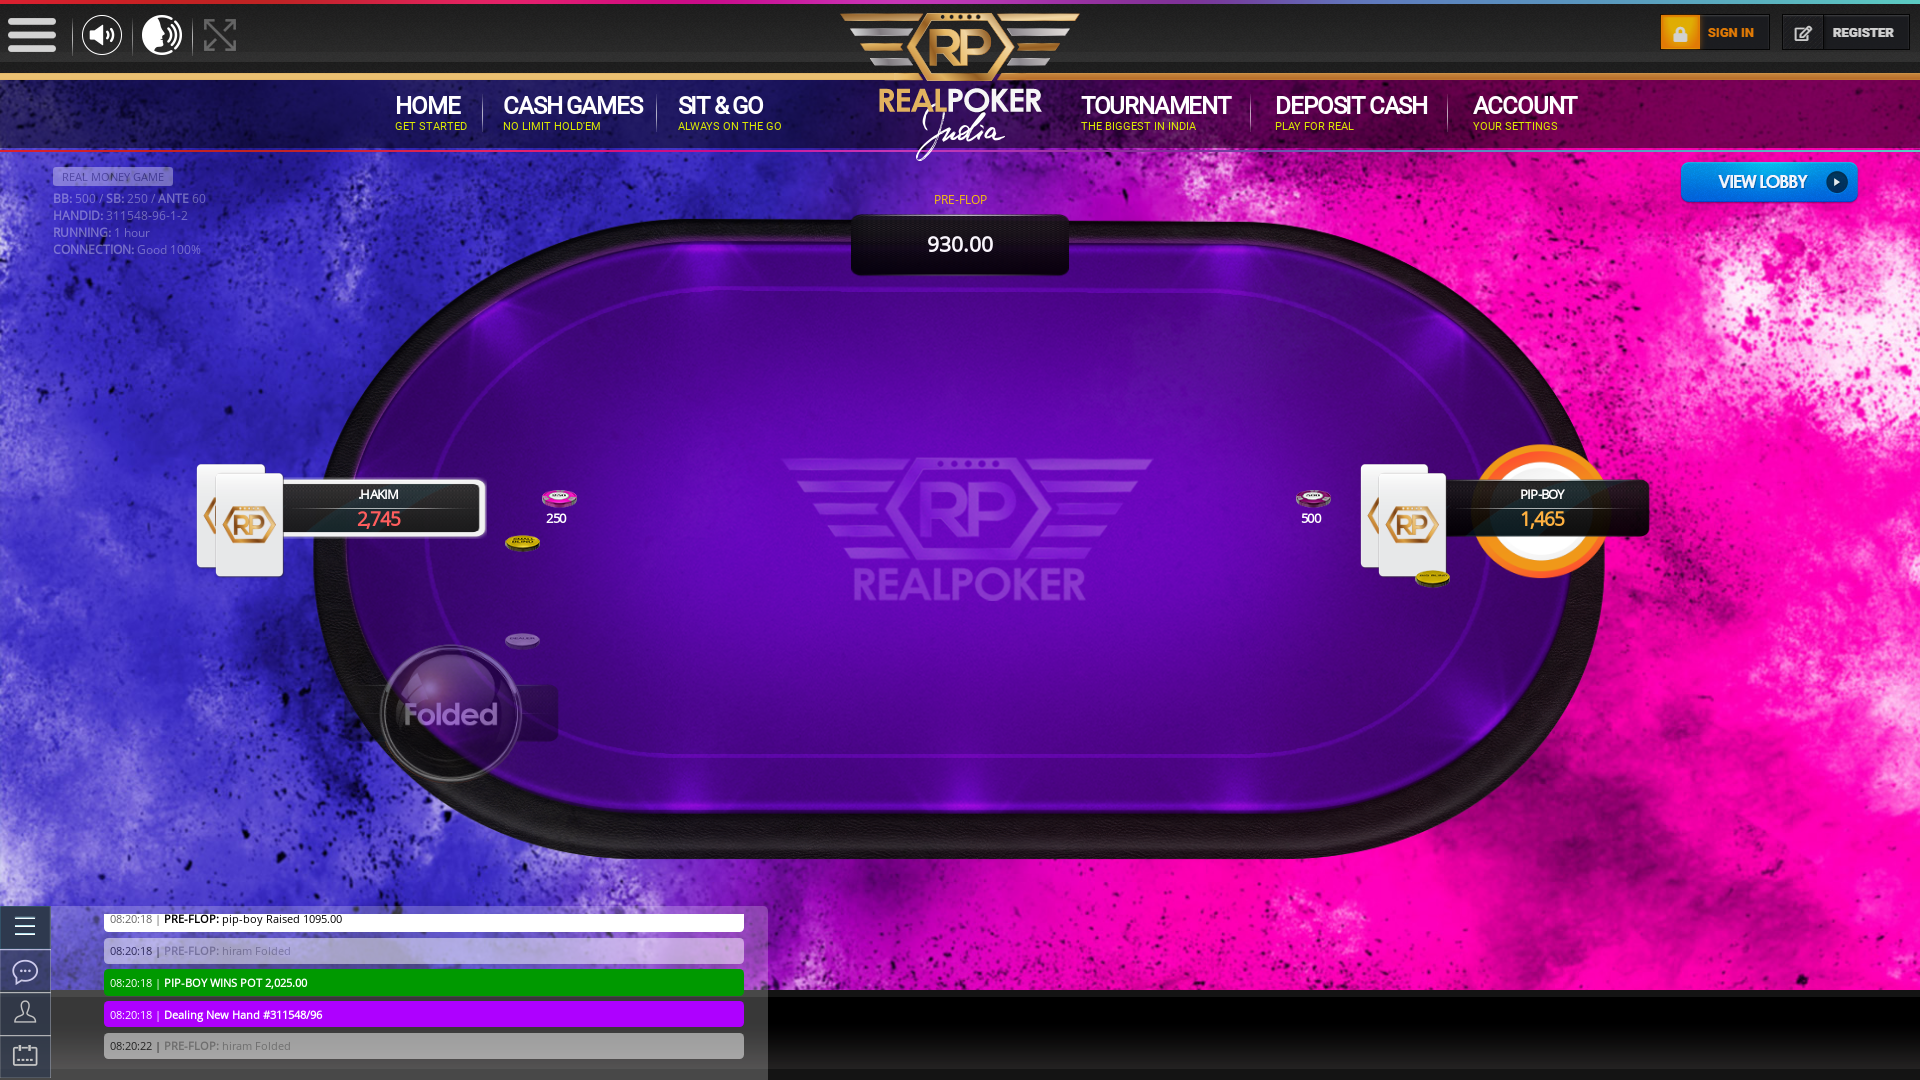 Mapusa Goa online poker game on a 10 player table in the 66th minute of the match